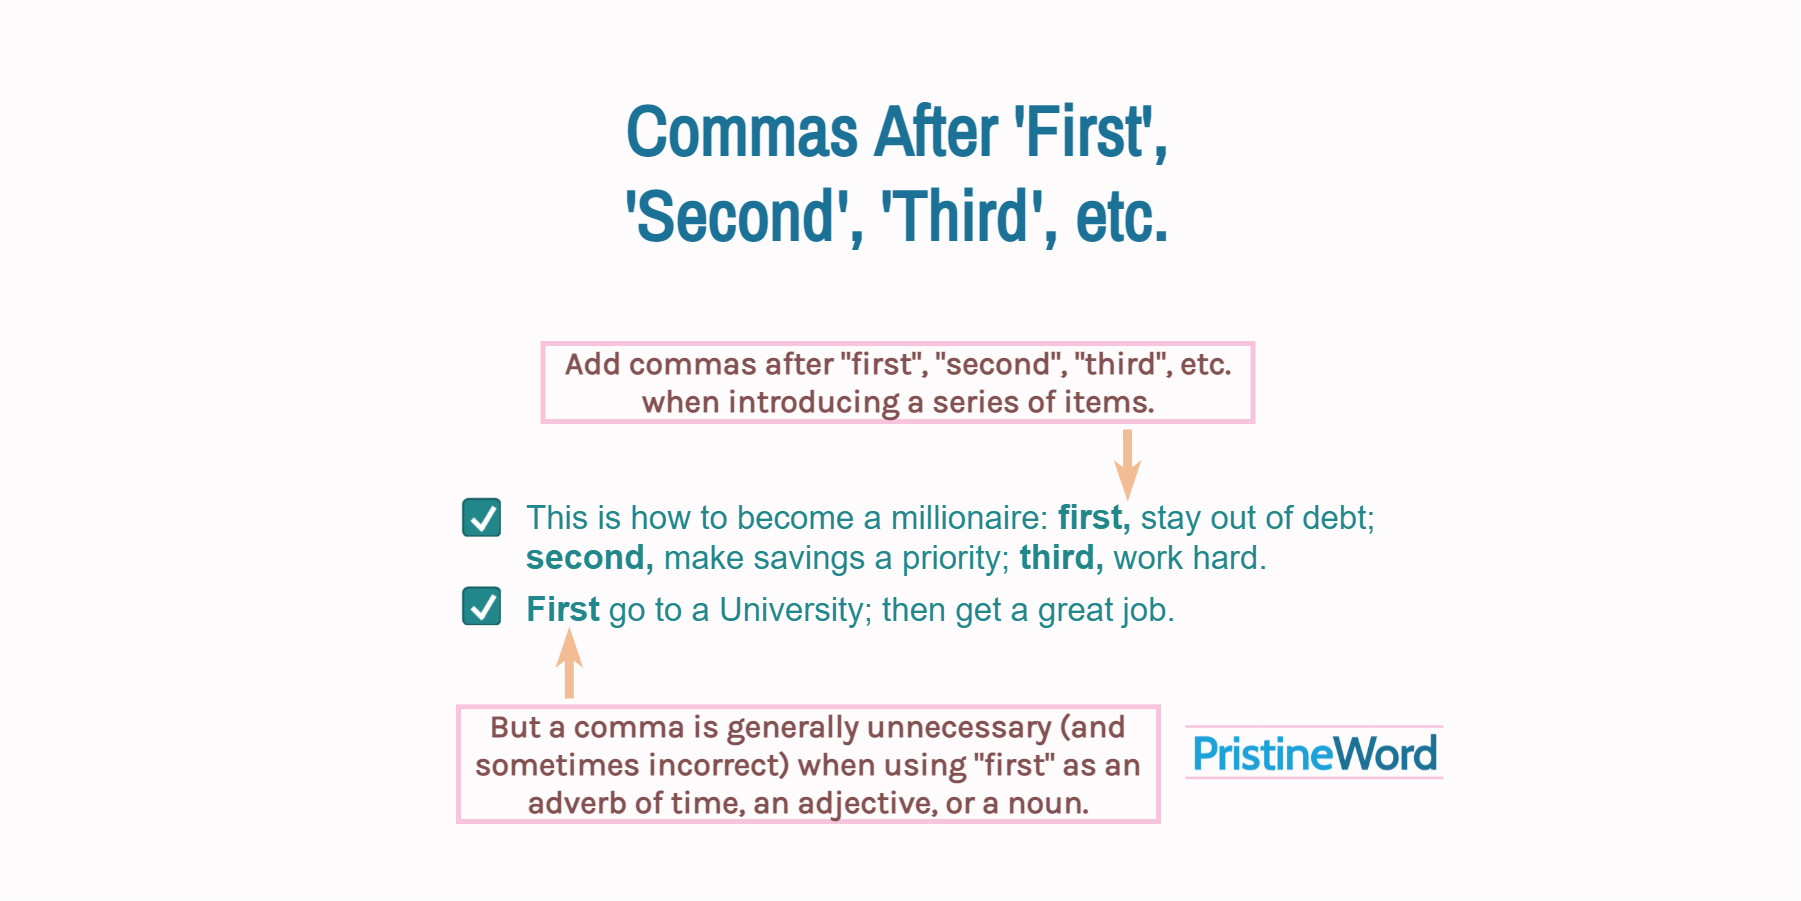 Commas After 'First', 'Second', 'Third', etc.